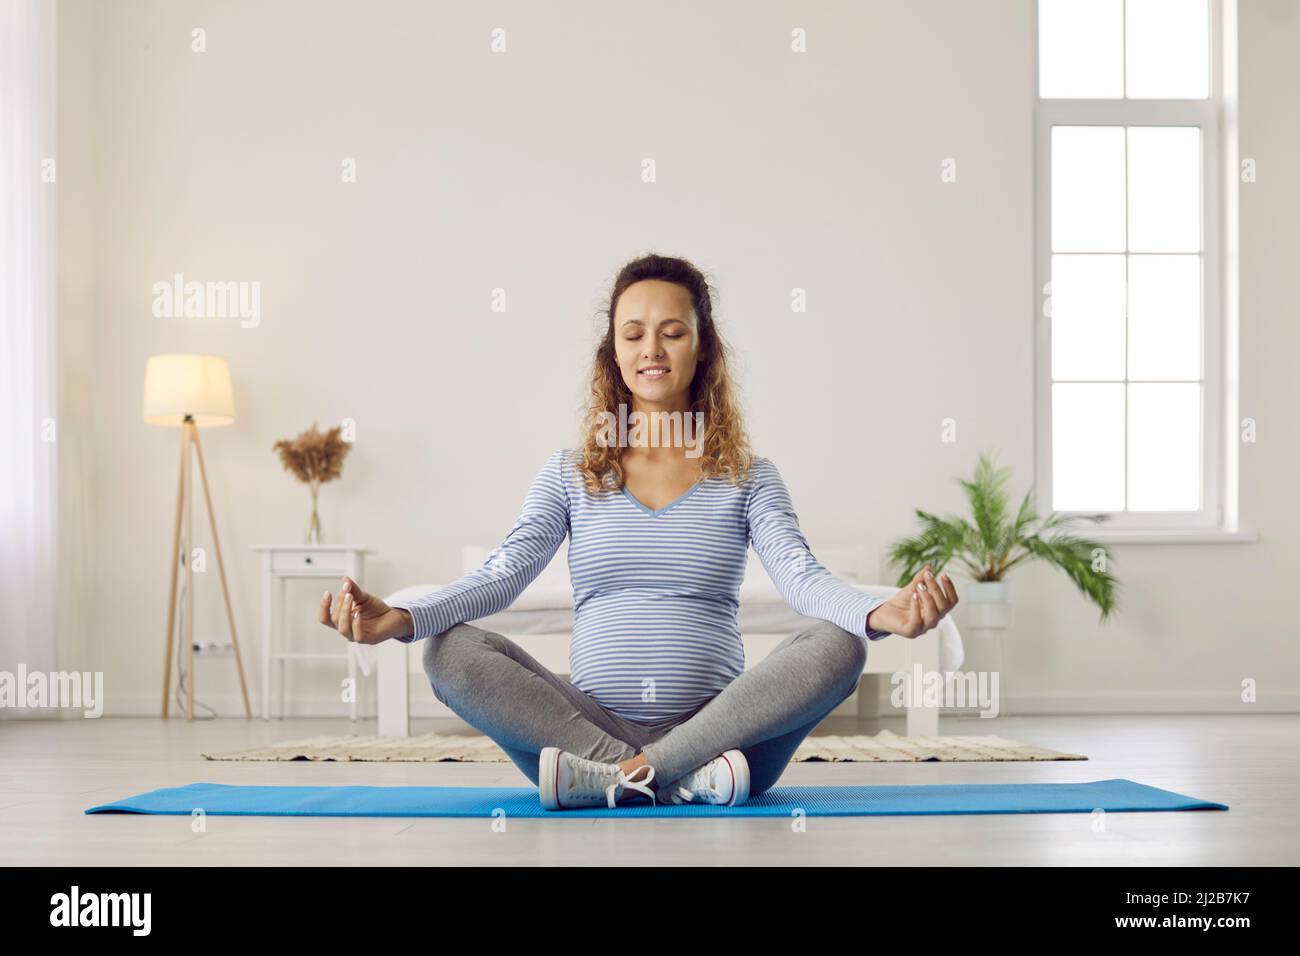 Calm pregnant woman meditates sitting in padmasana yoga position on floor at home. Stock Photo